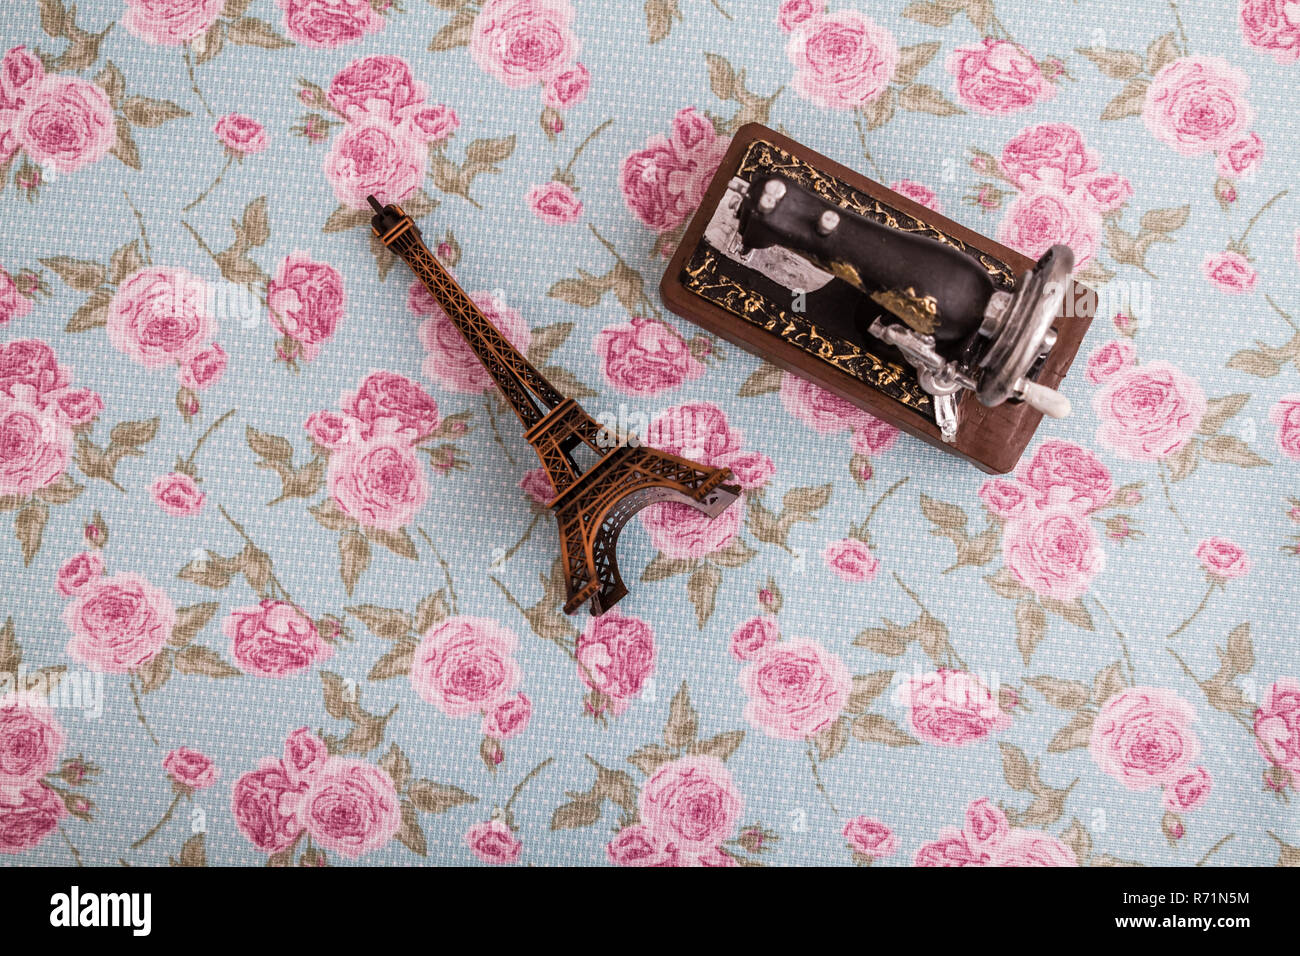 Statue Model of Eiffel Tower and Sewing Machine on Floral Background Stock Photo